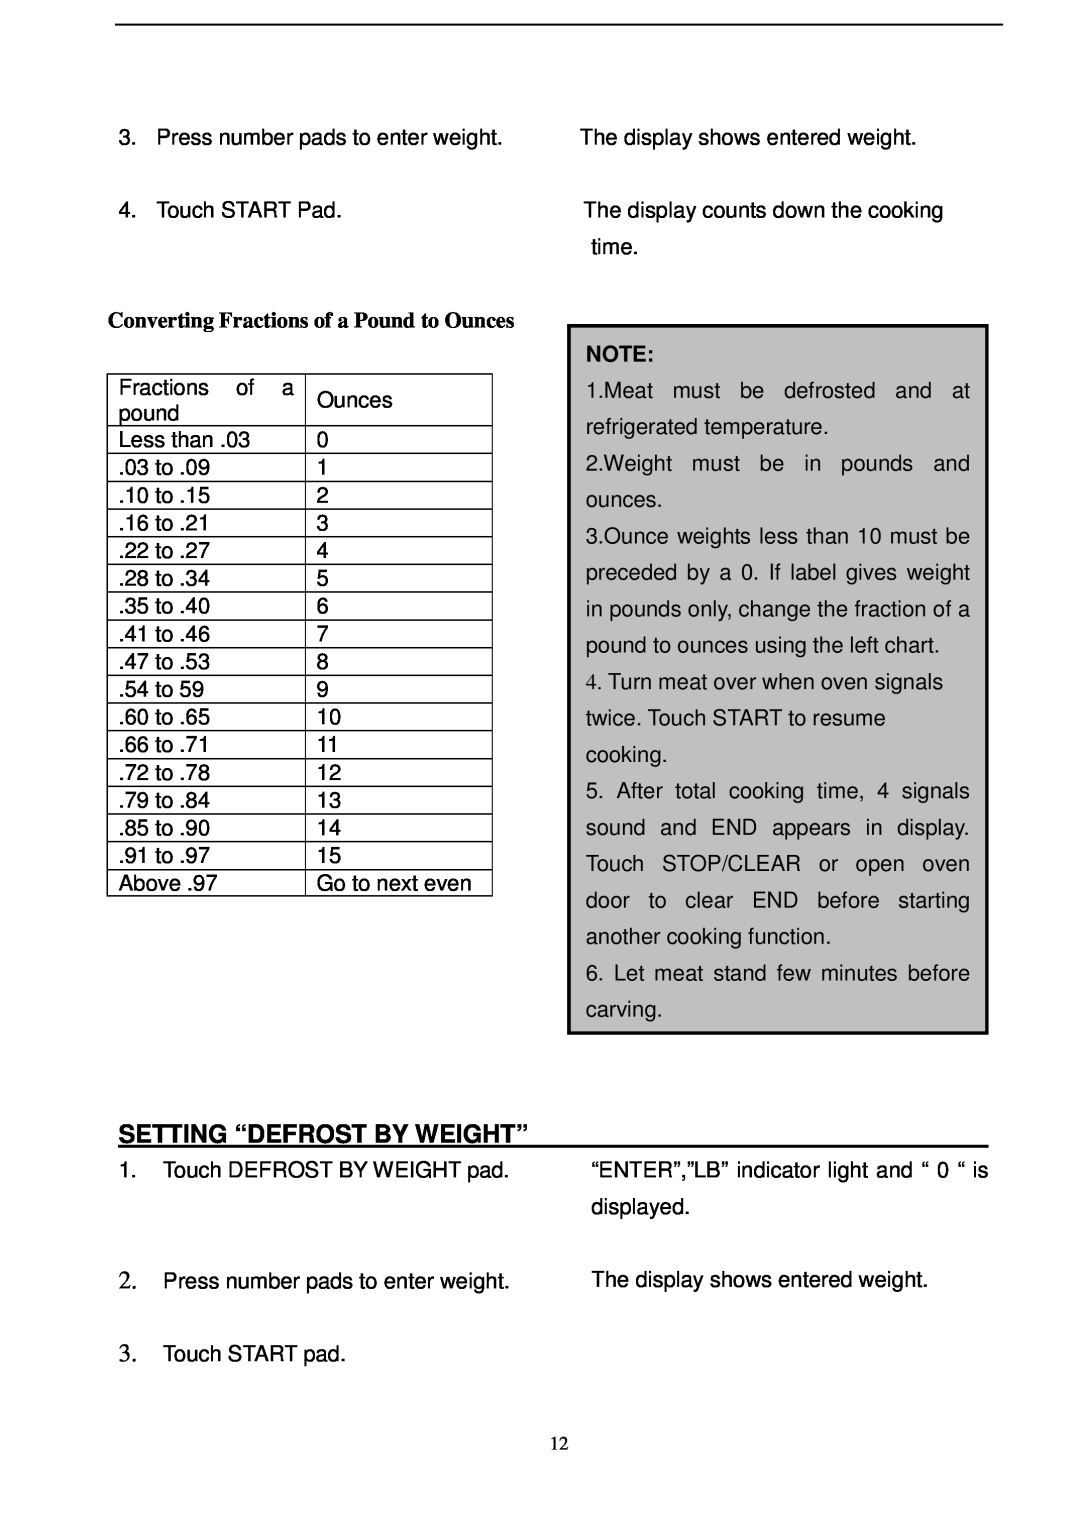 Magic Chef MCD990STG owner manual Setting “Defrost By Weight”, Converting Fractions of a Pound to Ounces 